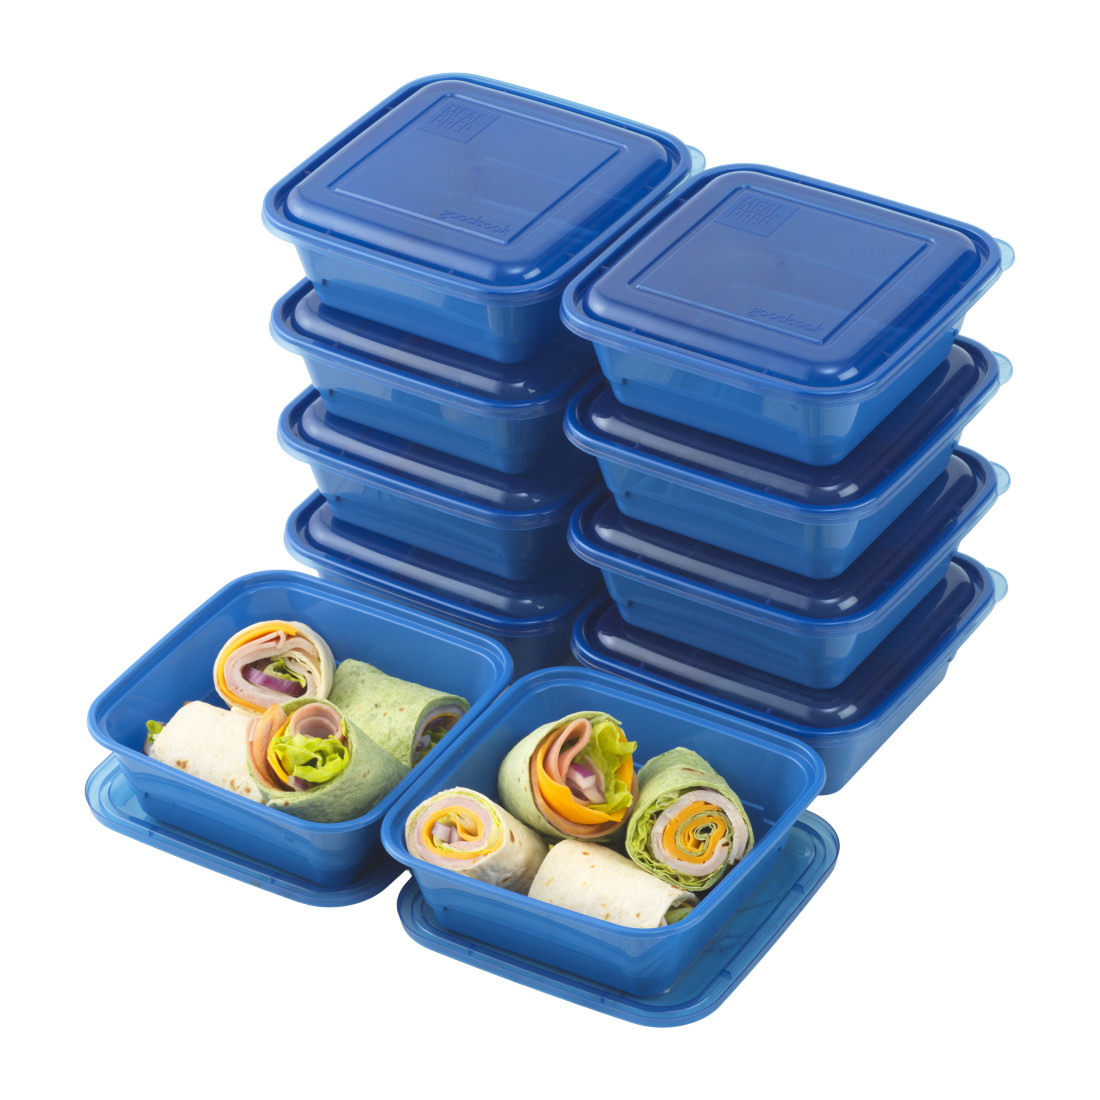 Meal Prep Containers  BPA-Free Storage for Healthy Meals - PACKTHISMEAL